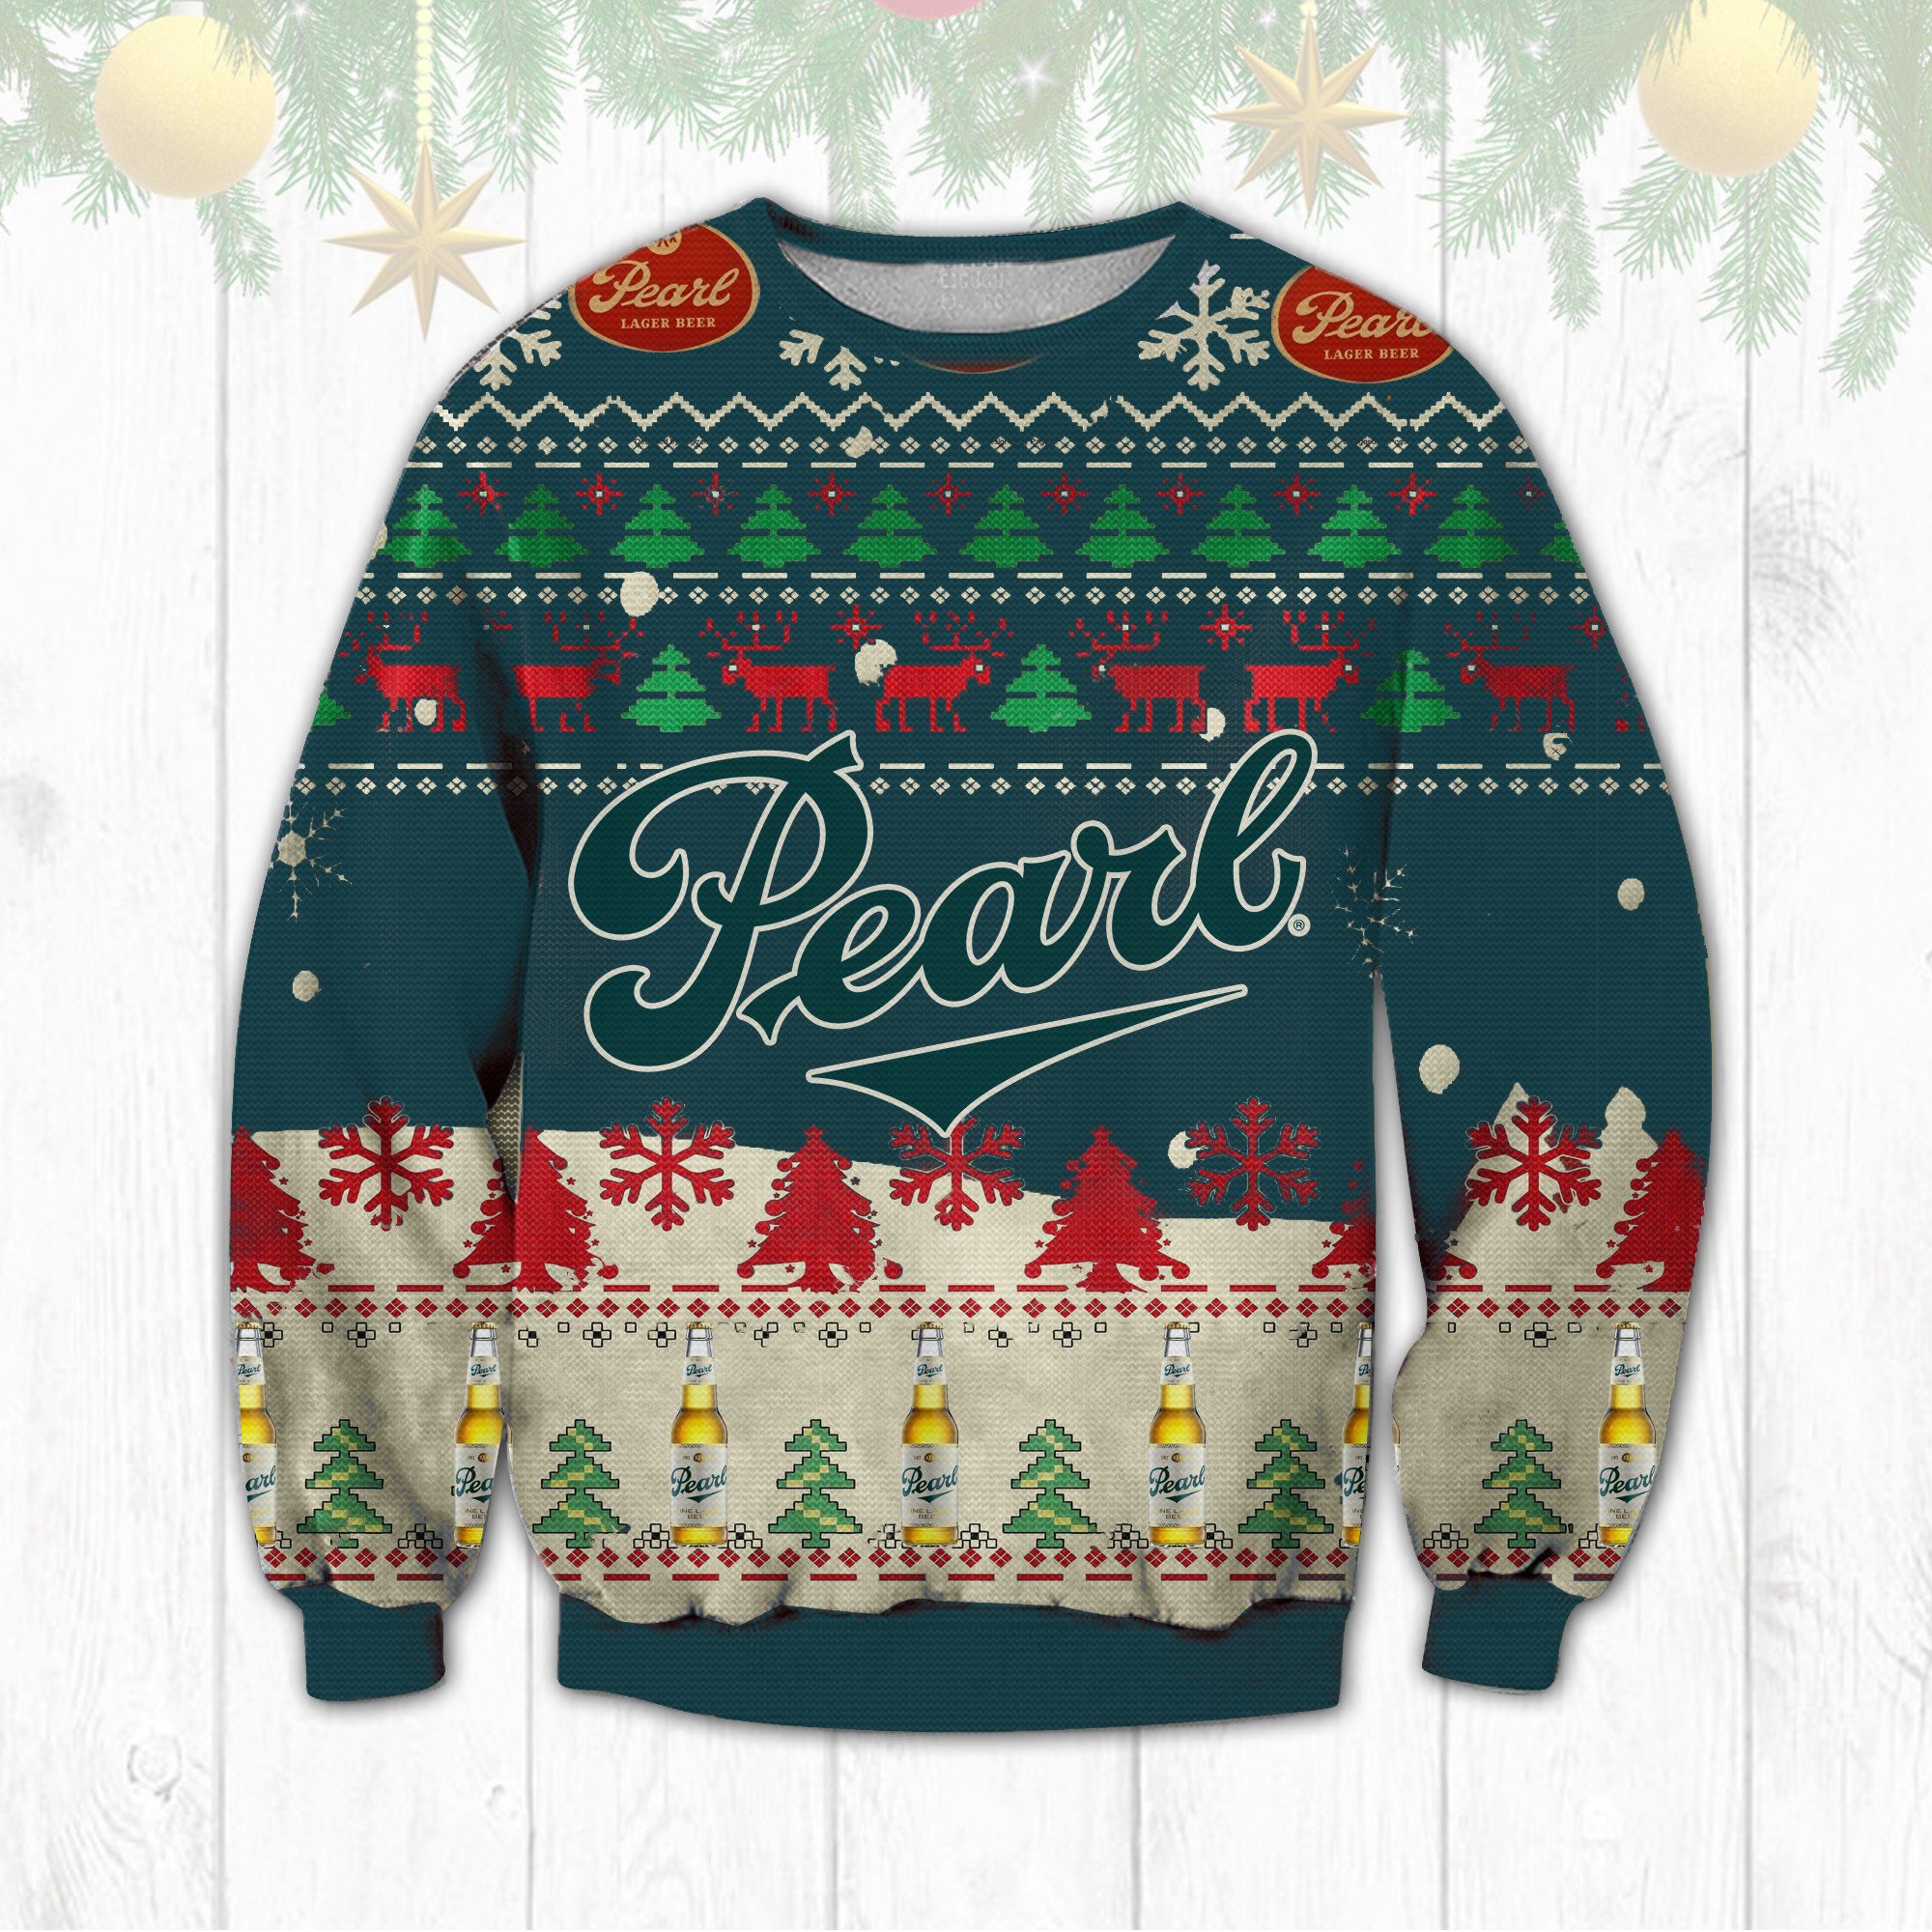 LIMITED Pearl Beer Brewing Company ugly Christmas sweater 1